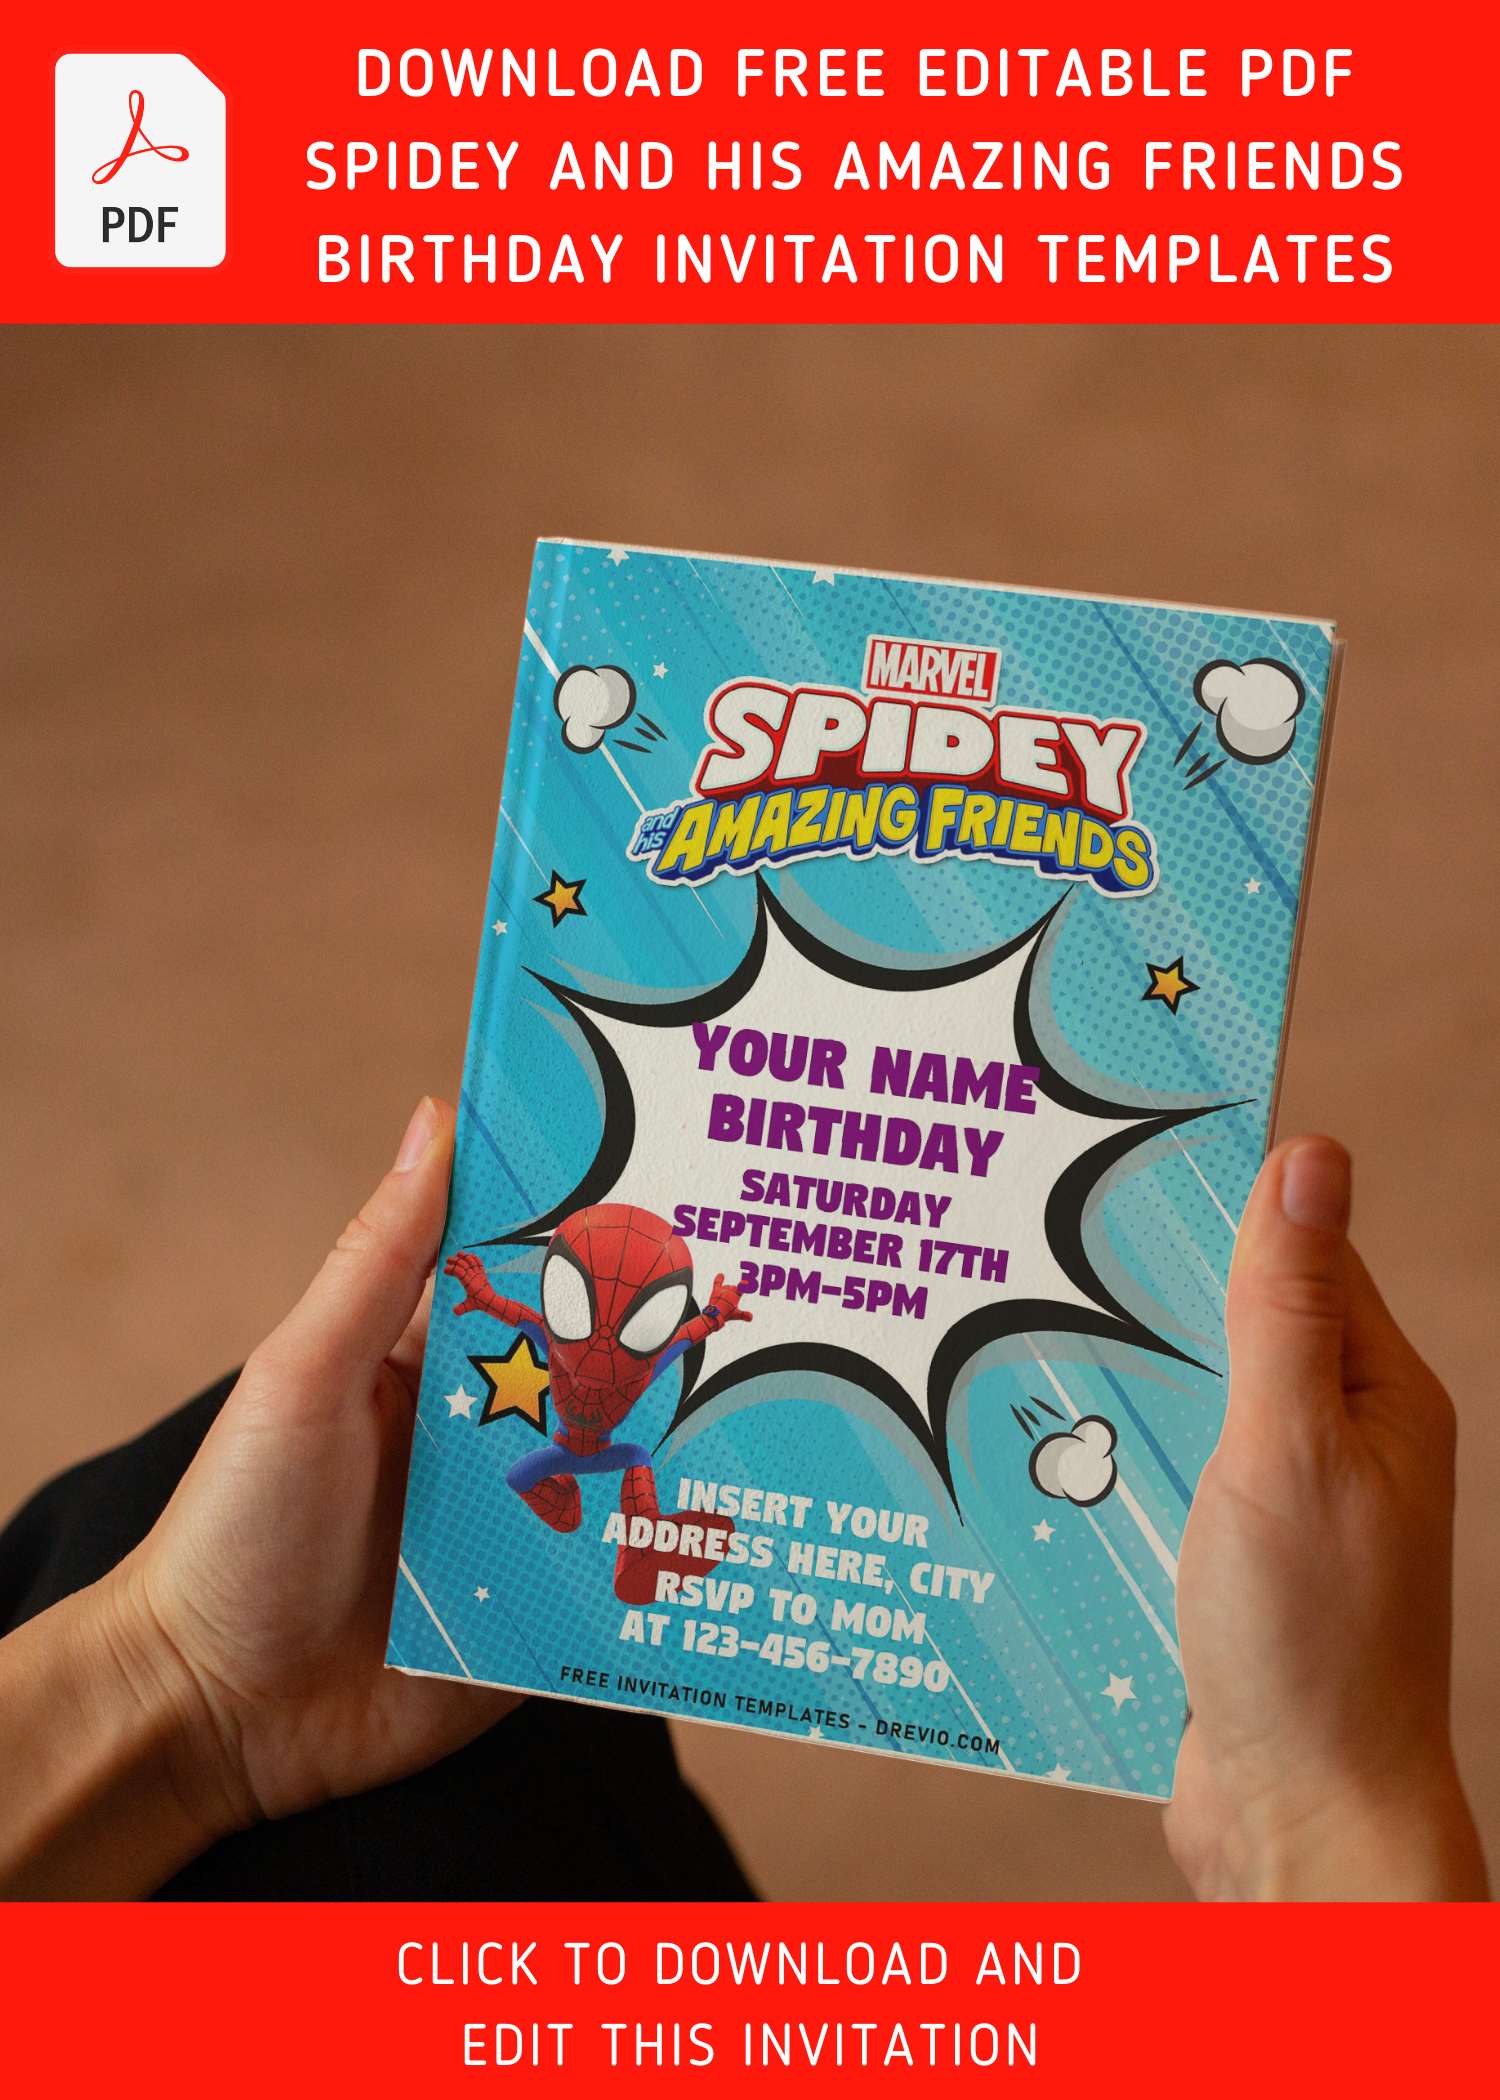 Free Editable PDF Epic Spidey And His Amazing Friends Birthday